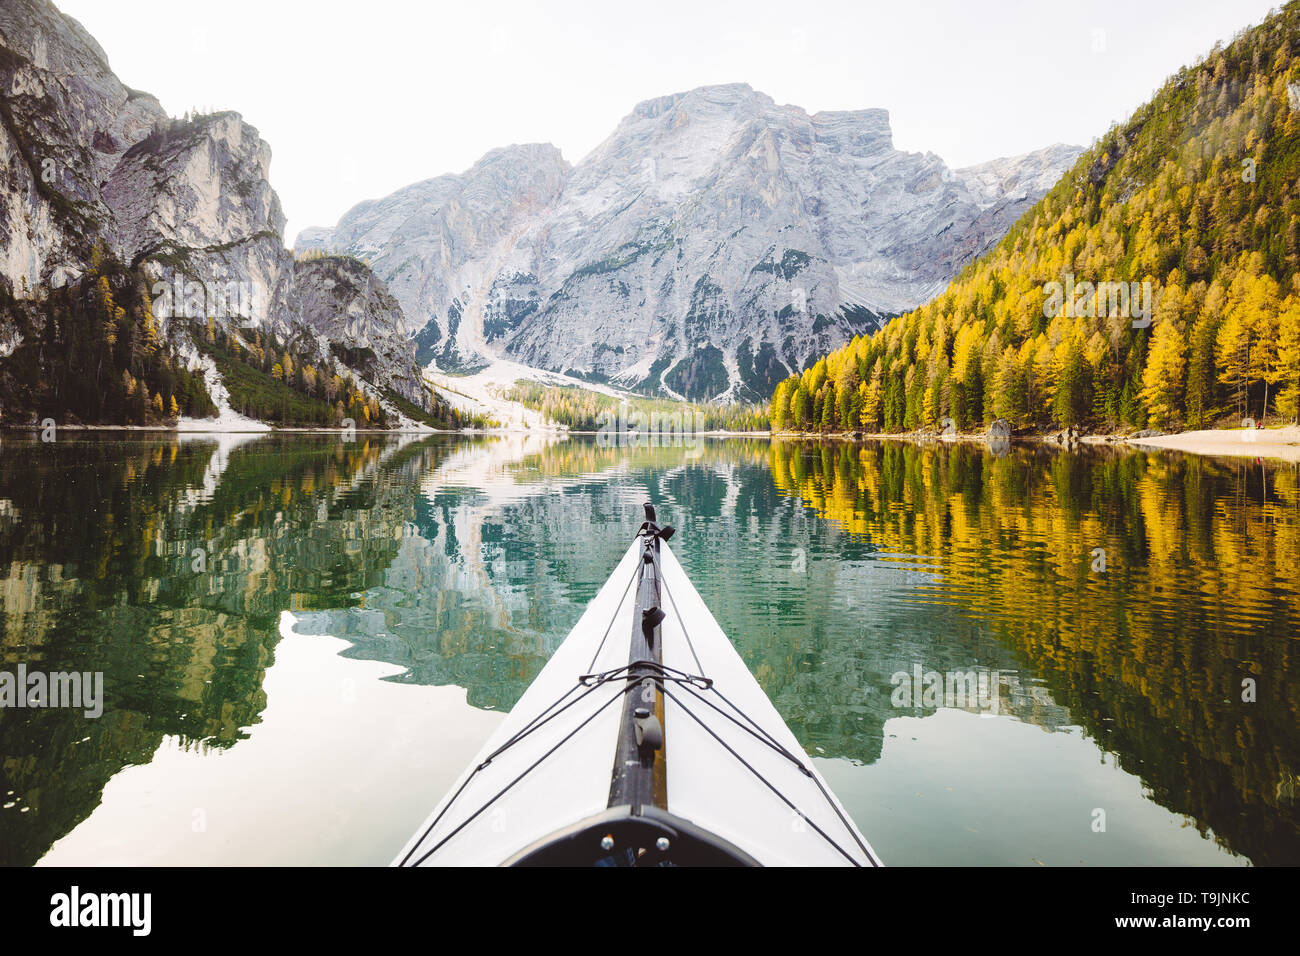 Beautiful view of kayak on a calm lake with amazing reflections of mountain peaks and trees with yellow autumn foliage in fall, Lago di Braies, Italy Stock Photo